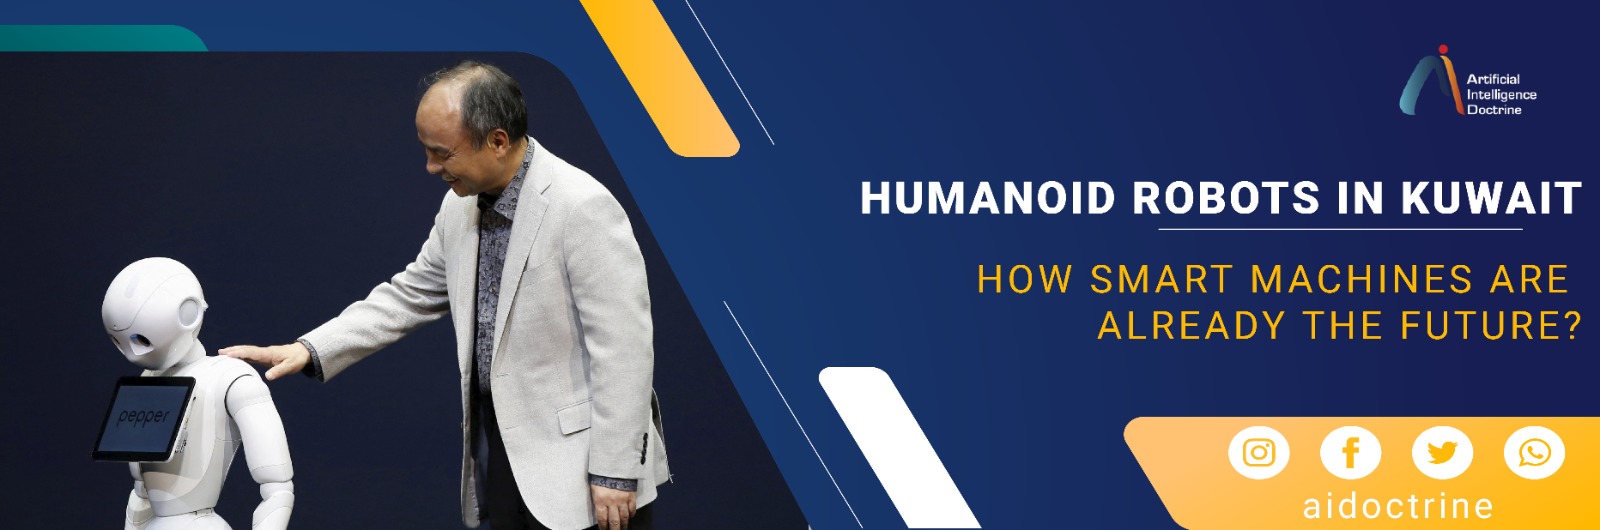 Humanoid Robots in Kuwait | How smart machines are already the future?